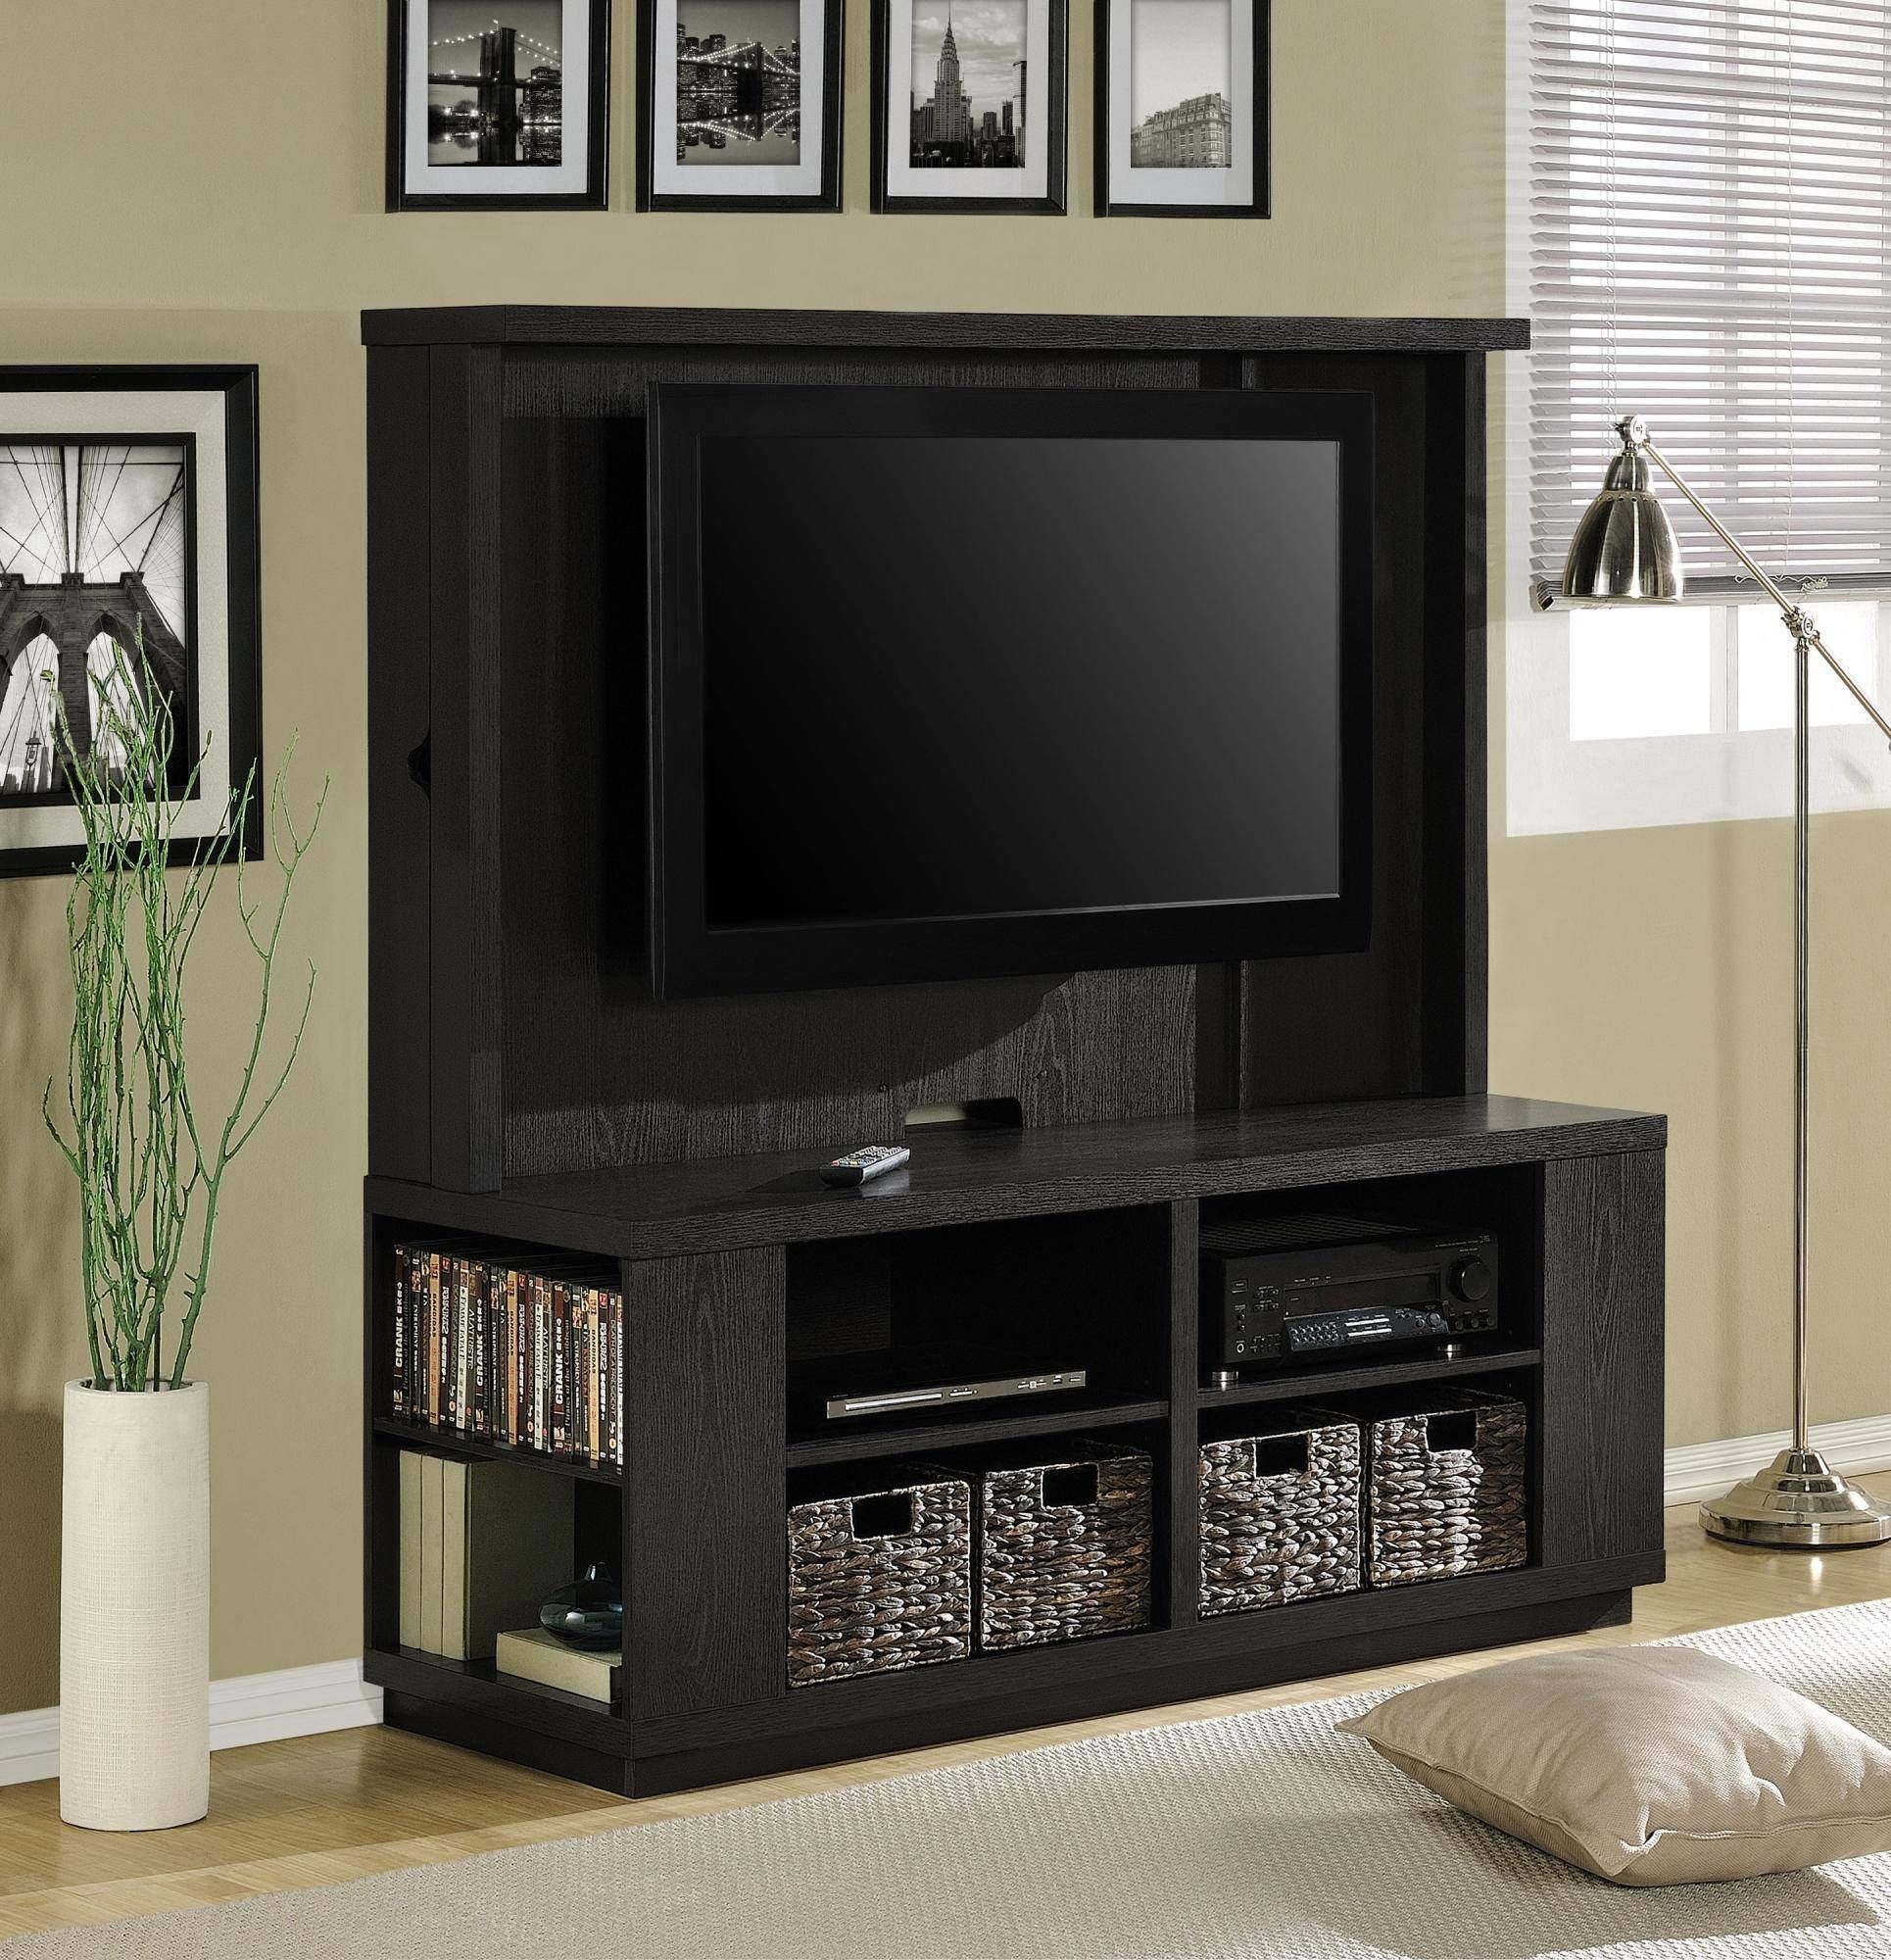 Small Black Wall Mounted Tv Stand With Storage Shelves Plus Woven Inside Tv Stands With Baskets (Photo 1 of 15)